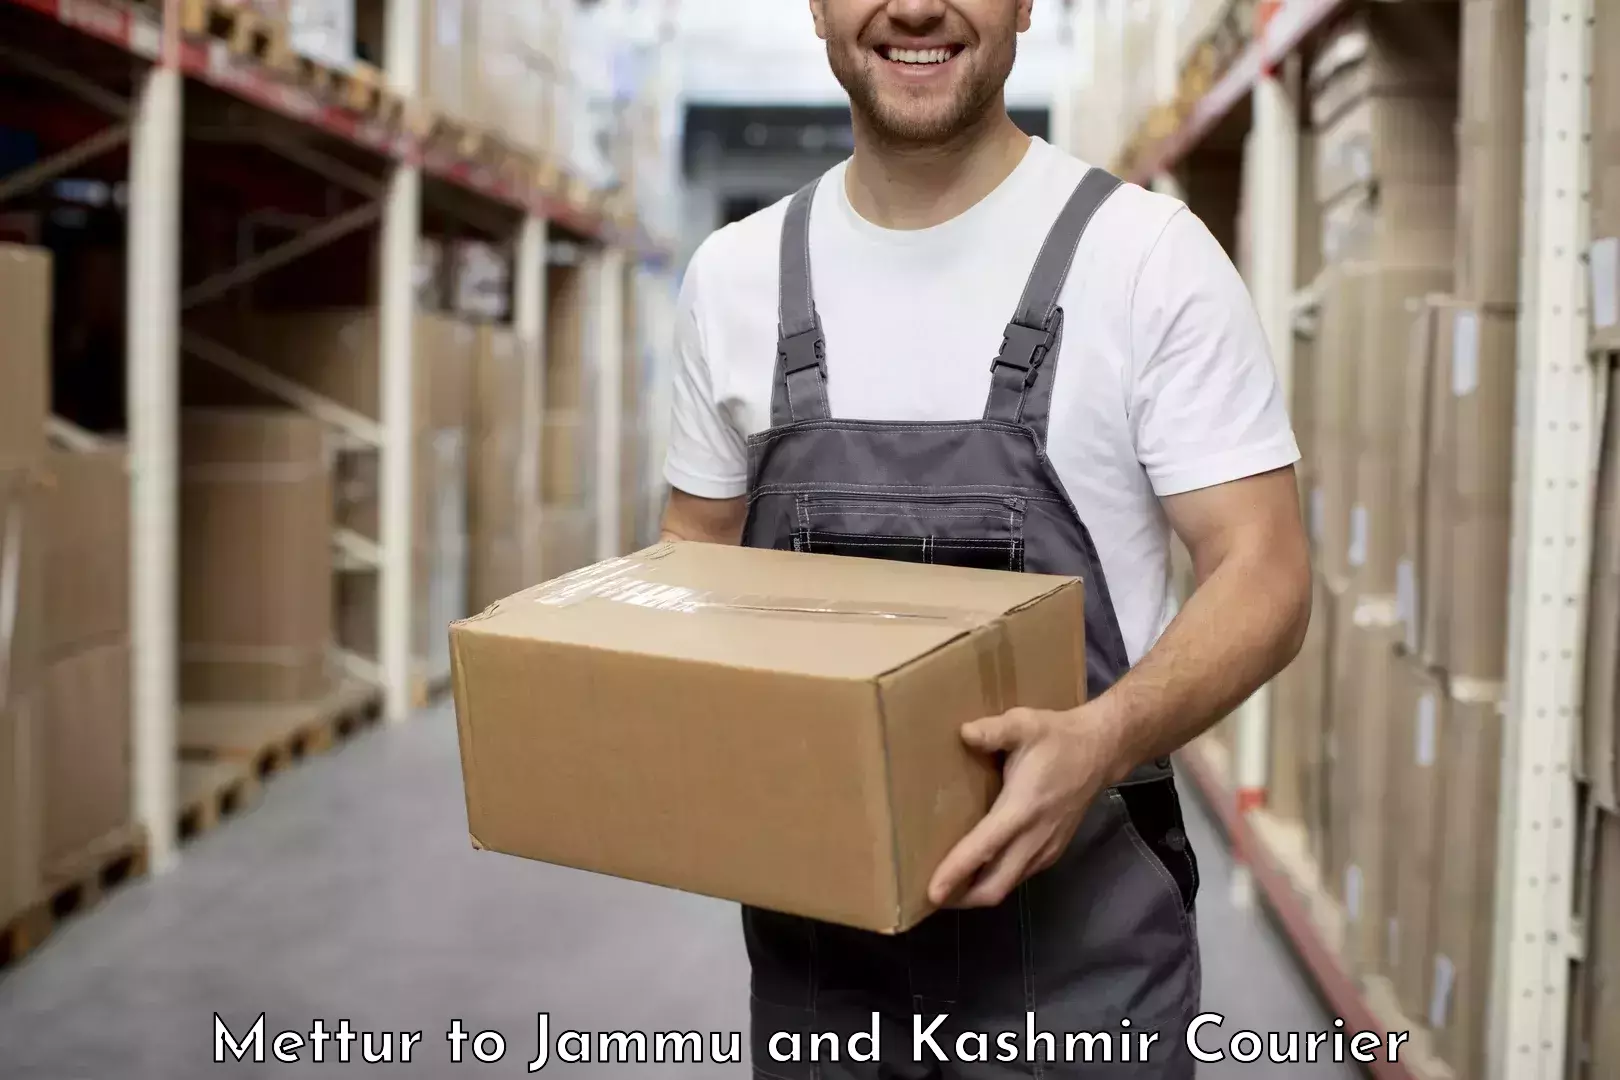 High-priority parcel service Mettur to Jammu and Kashmir